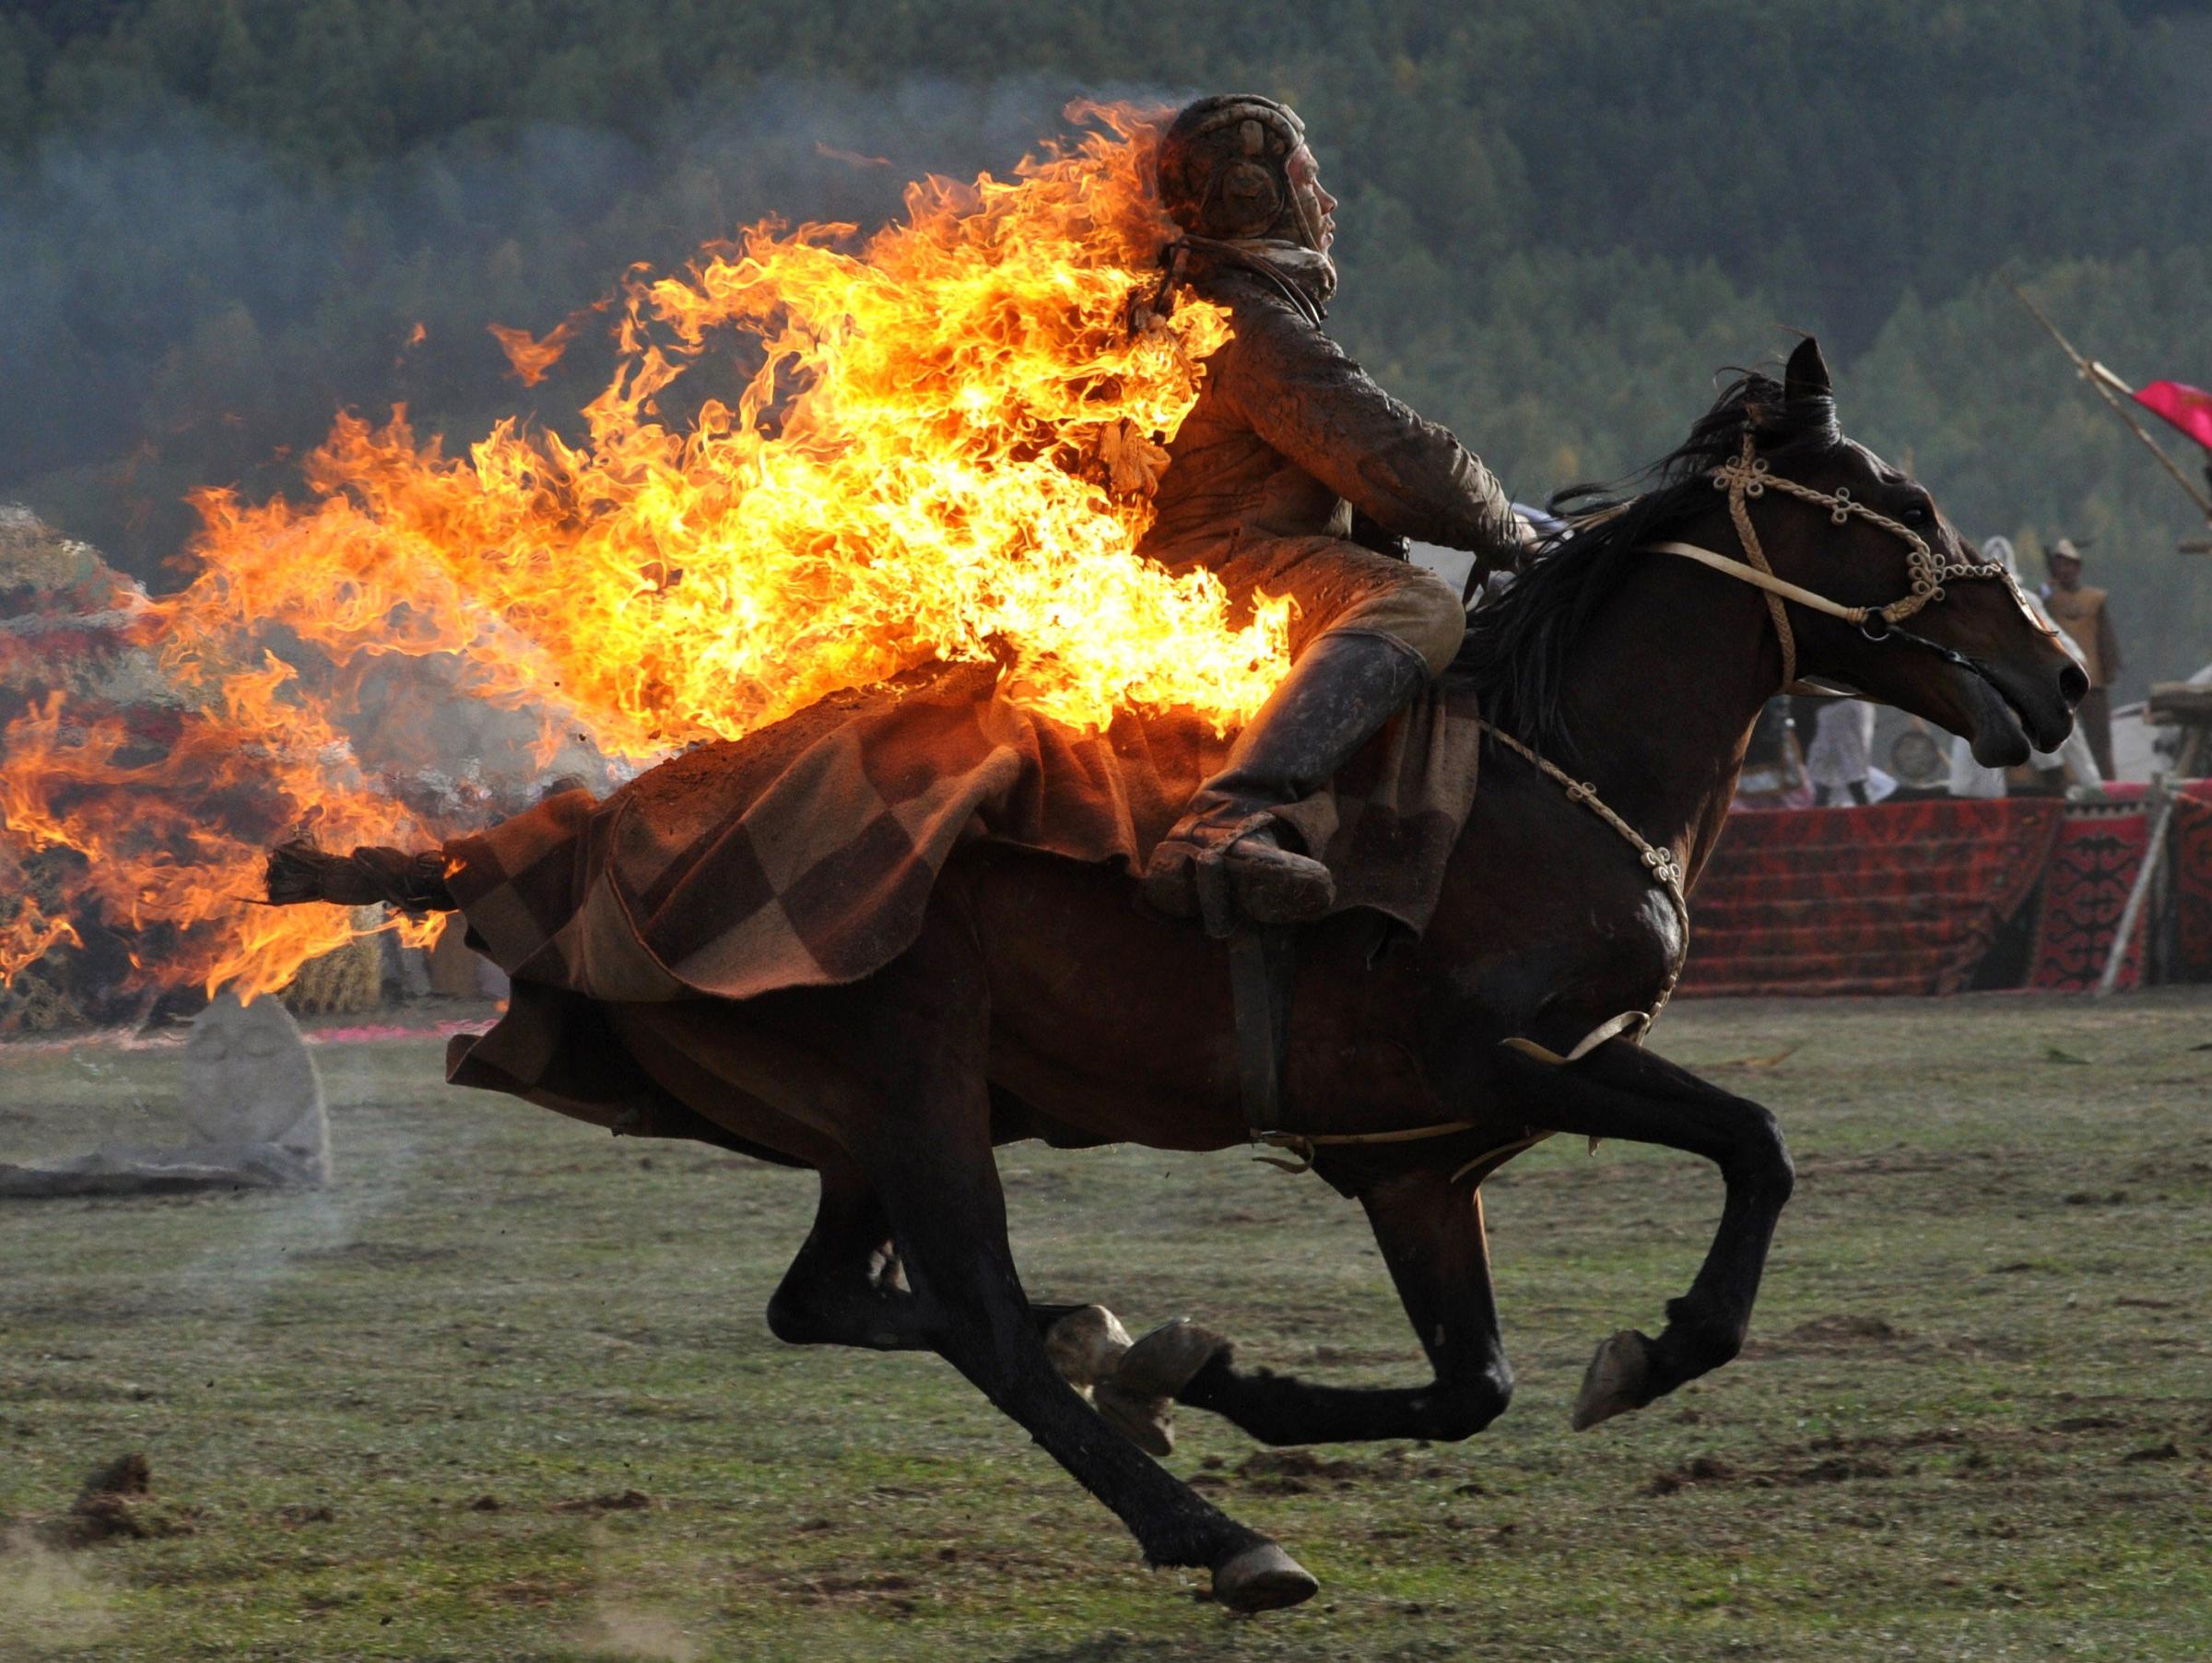 A Kyrgyz stuntman performing during the first World Nomad Games in the Kyrchin (Semenovskoe) gorge, about 300 km from Bishkek on Sept. 10, 2014.